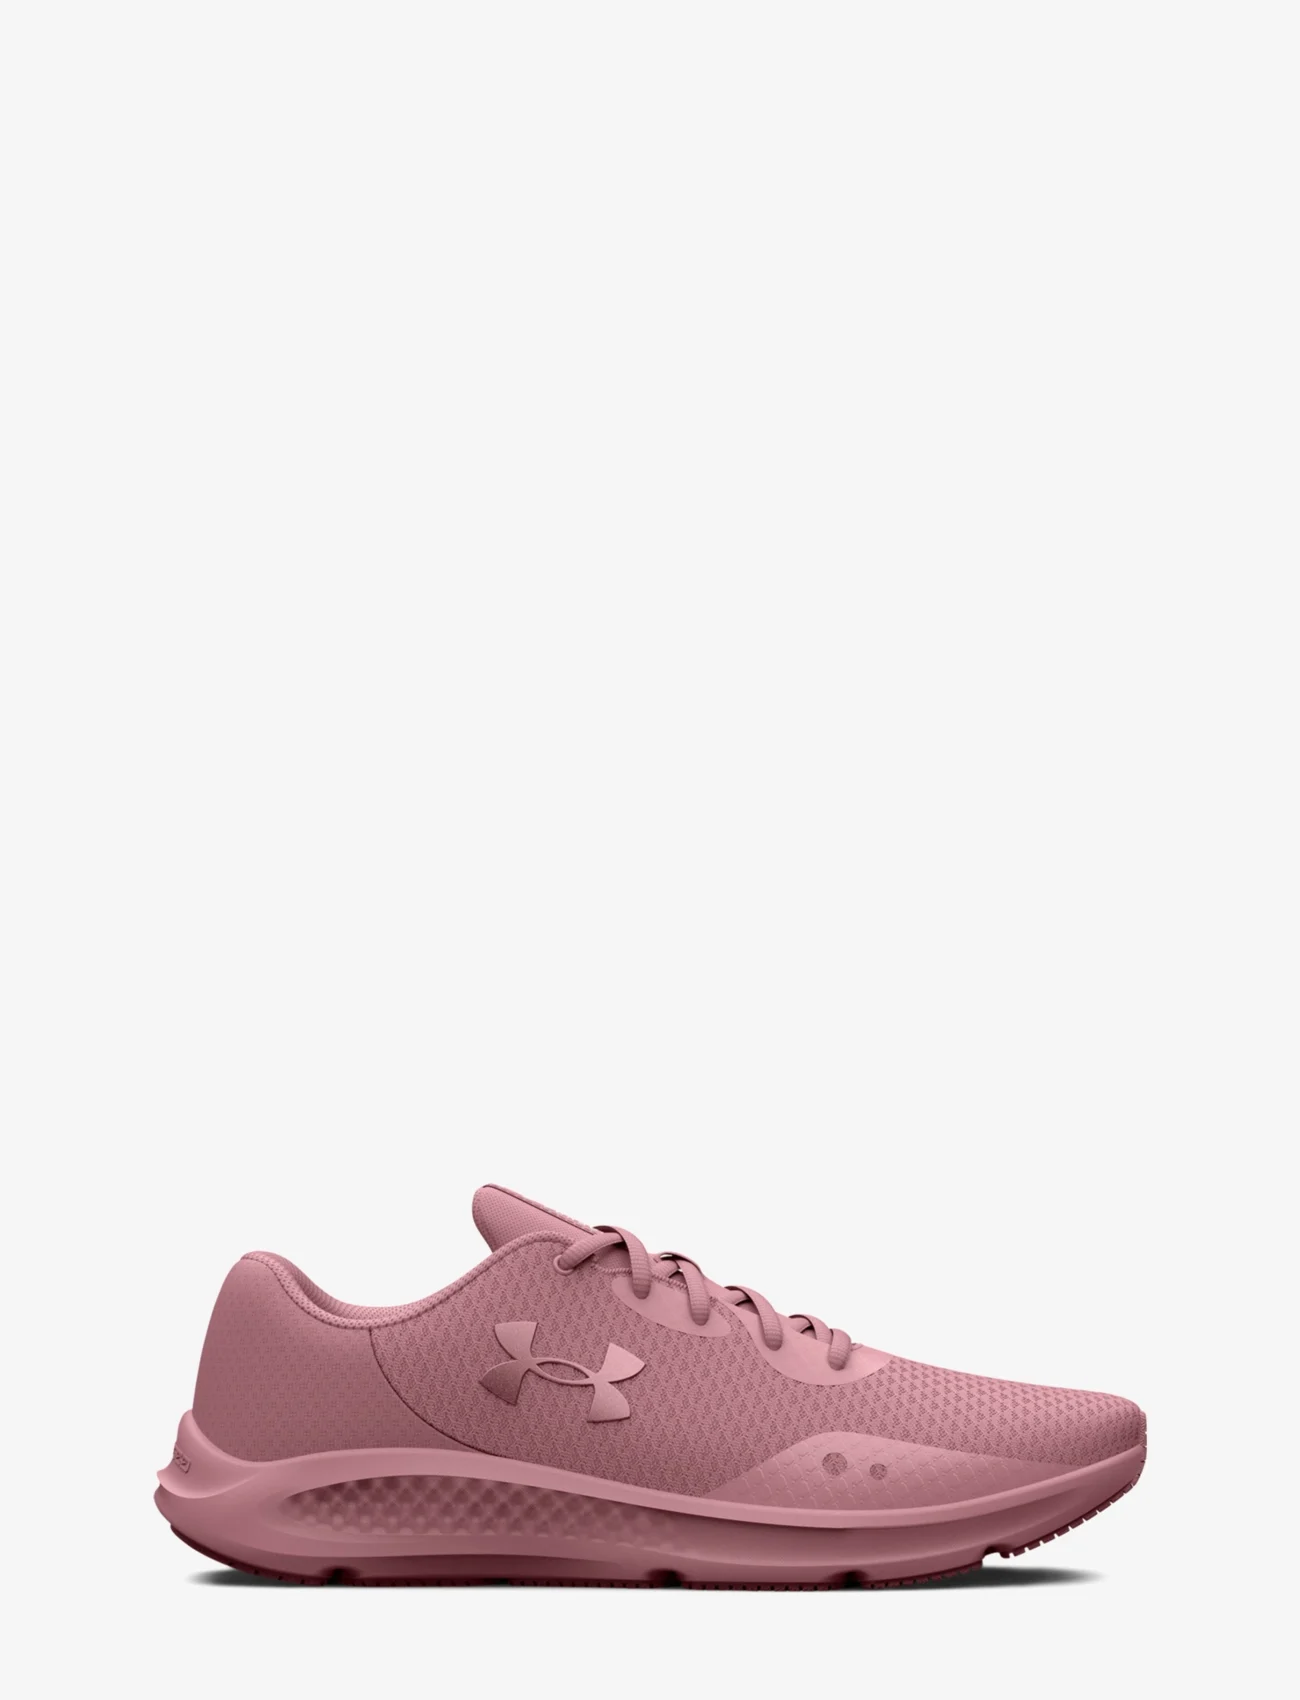 Under Armour - UA W Charged Pursuit 3 - buty do biegania - red - 1